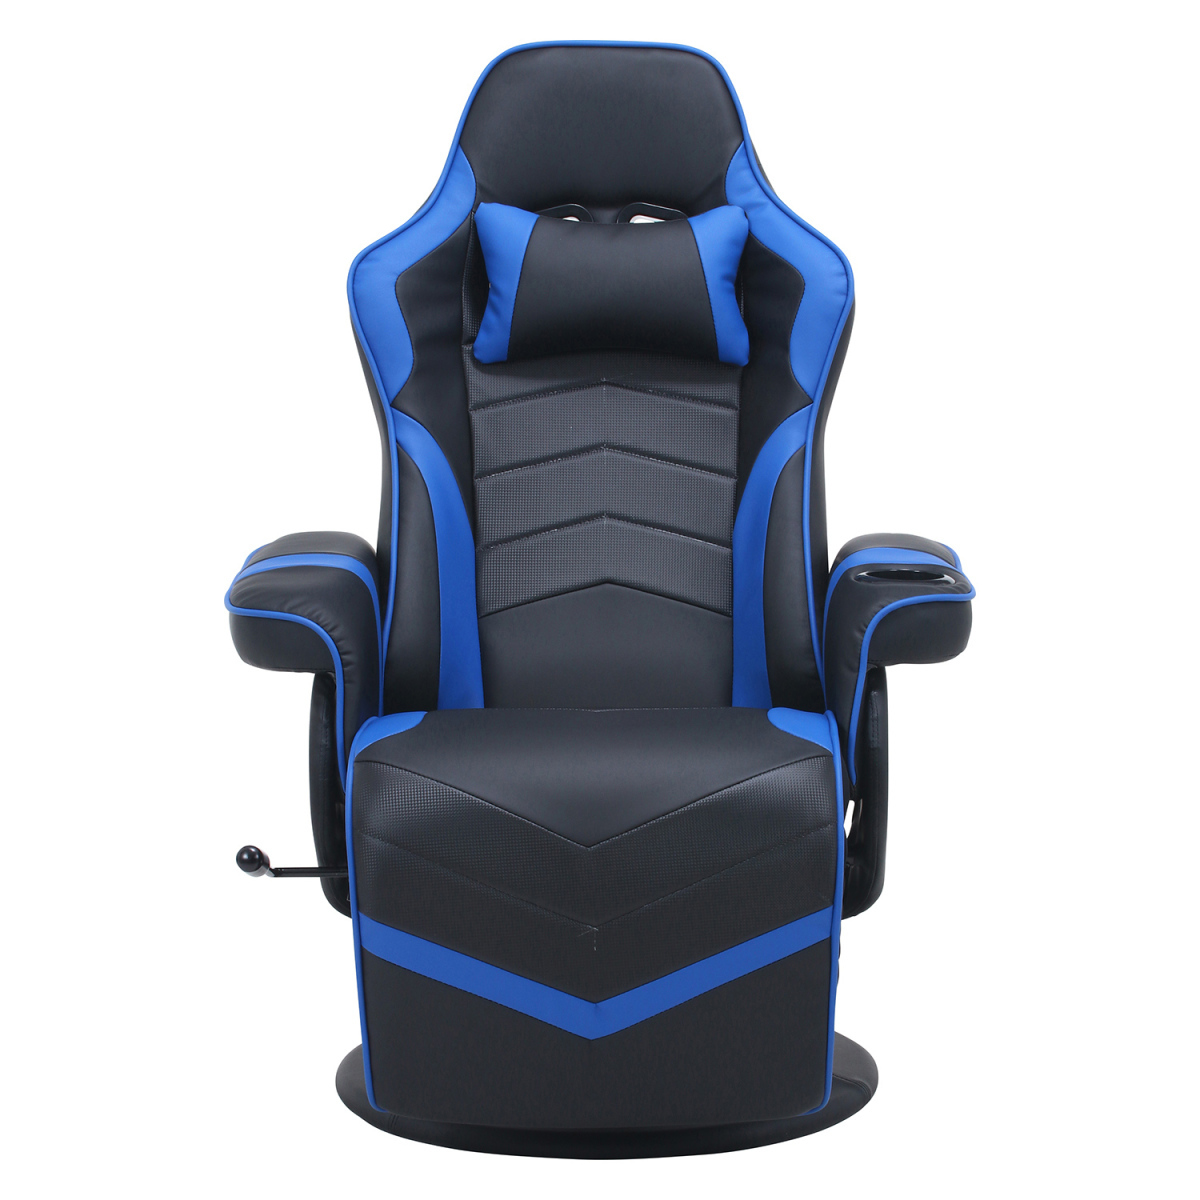  personal ge-ming chair foot less attaching black ( one part blue )[ new goods ][ free shipping ]( Hokkaido Okinawa remote island postage separately )